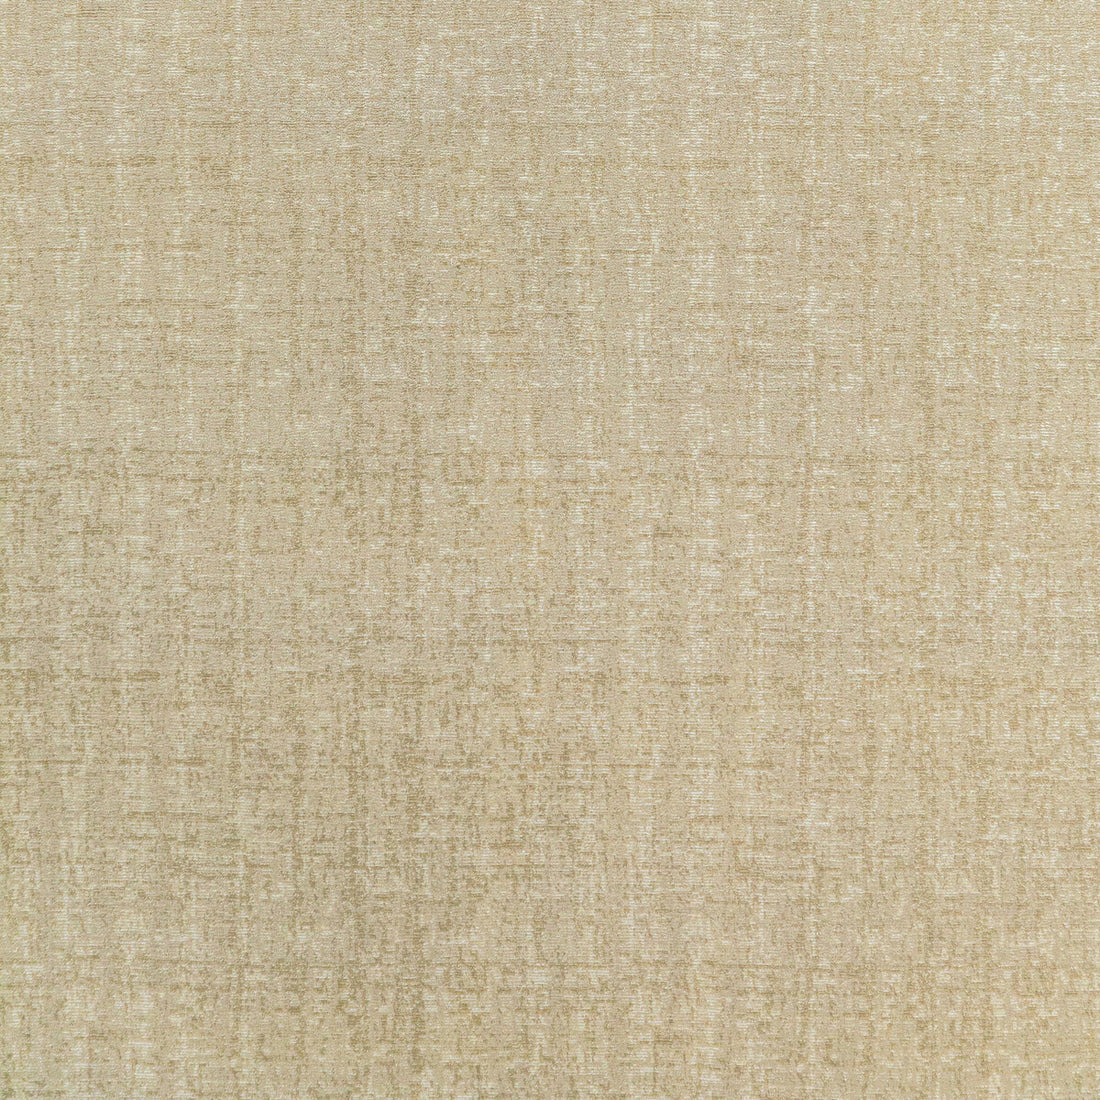 Embody fabric in gold color - pattern 36575.416.0 - by Kravet Couture in the Modern Luxe Silk Luster collection